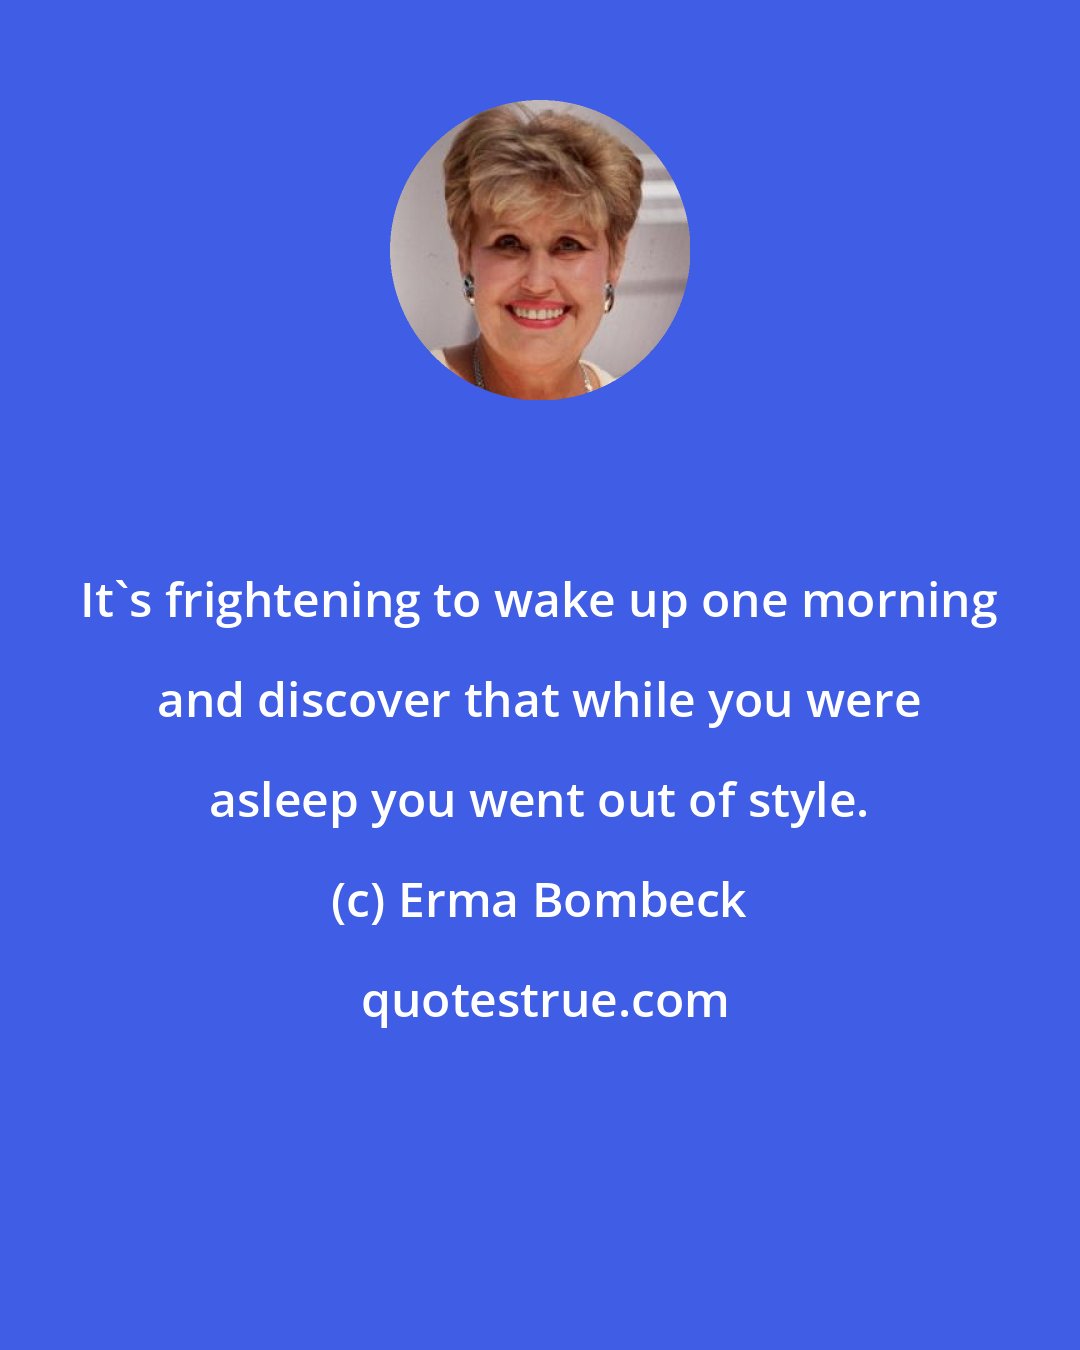 Erma Bombeck: It's frightening to wake up one morning and discover that while you were asleep you went out of style.